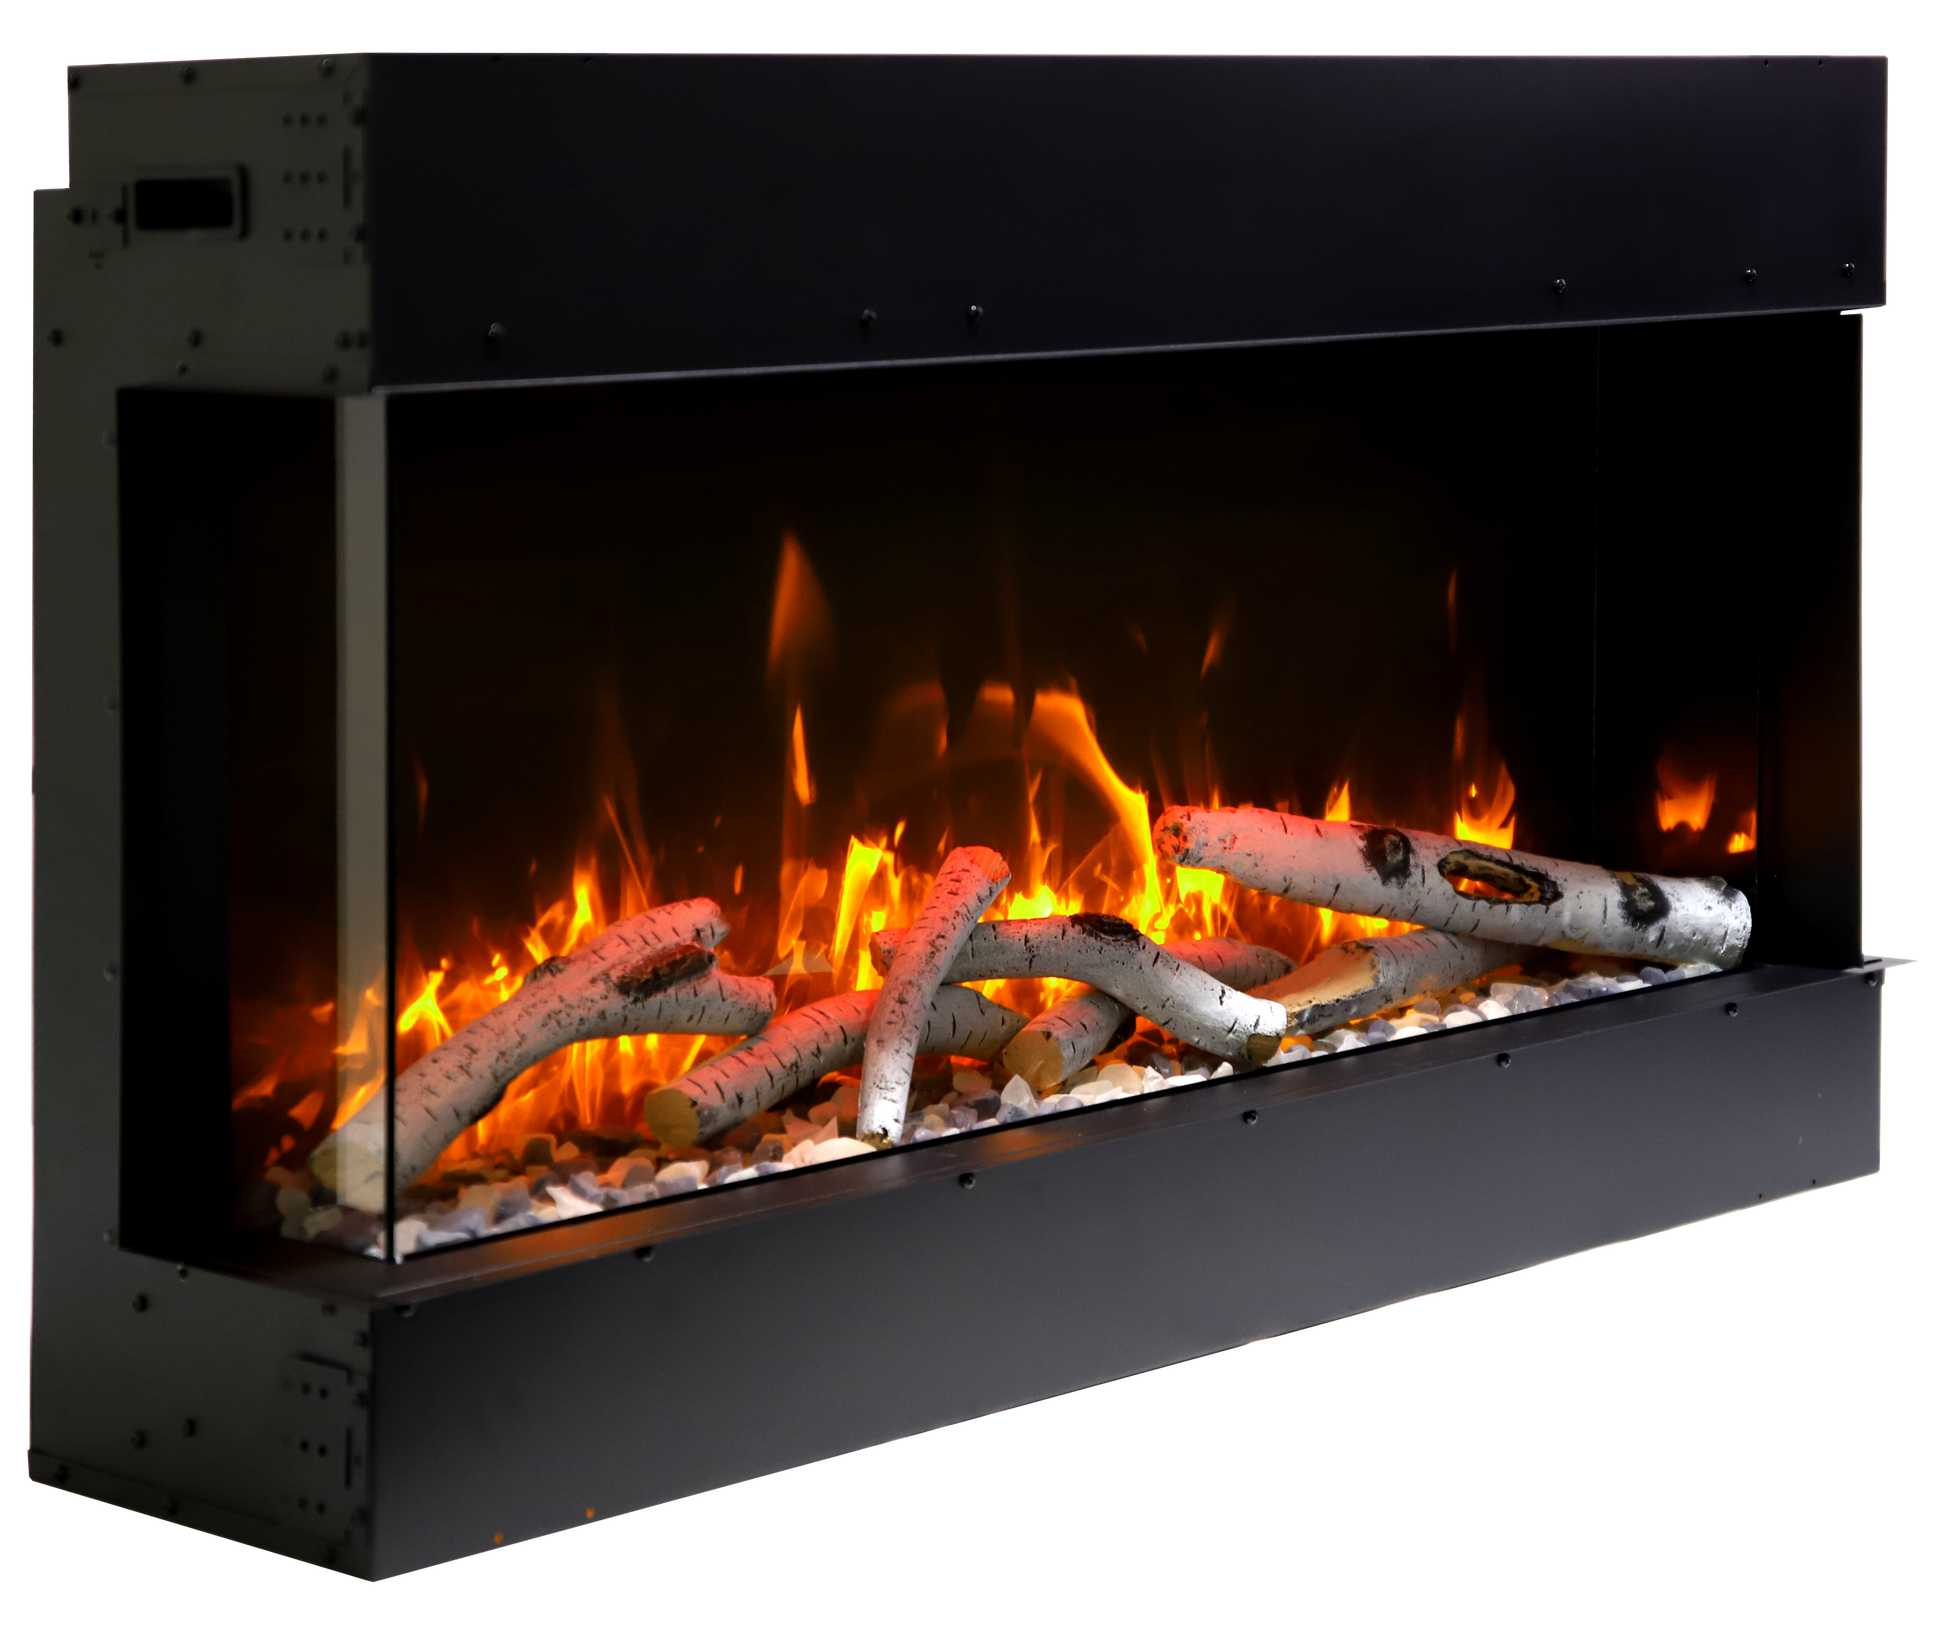 BAY-SLIM 3 Sided Electric Fireplace | Remii | Buy Fireplaces Online